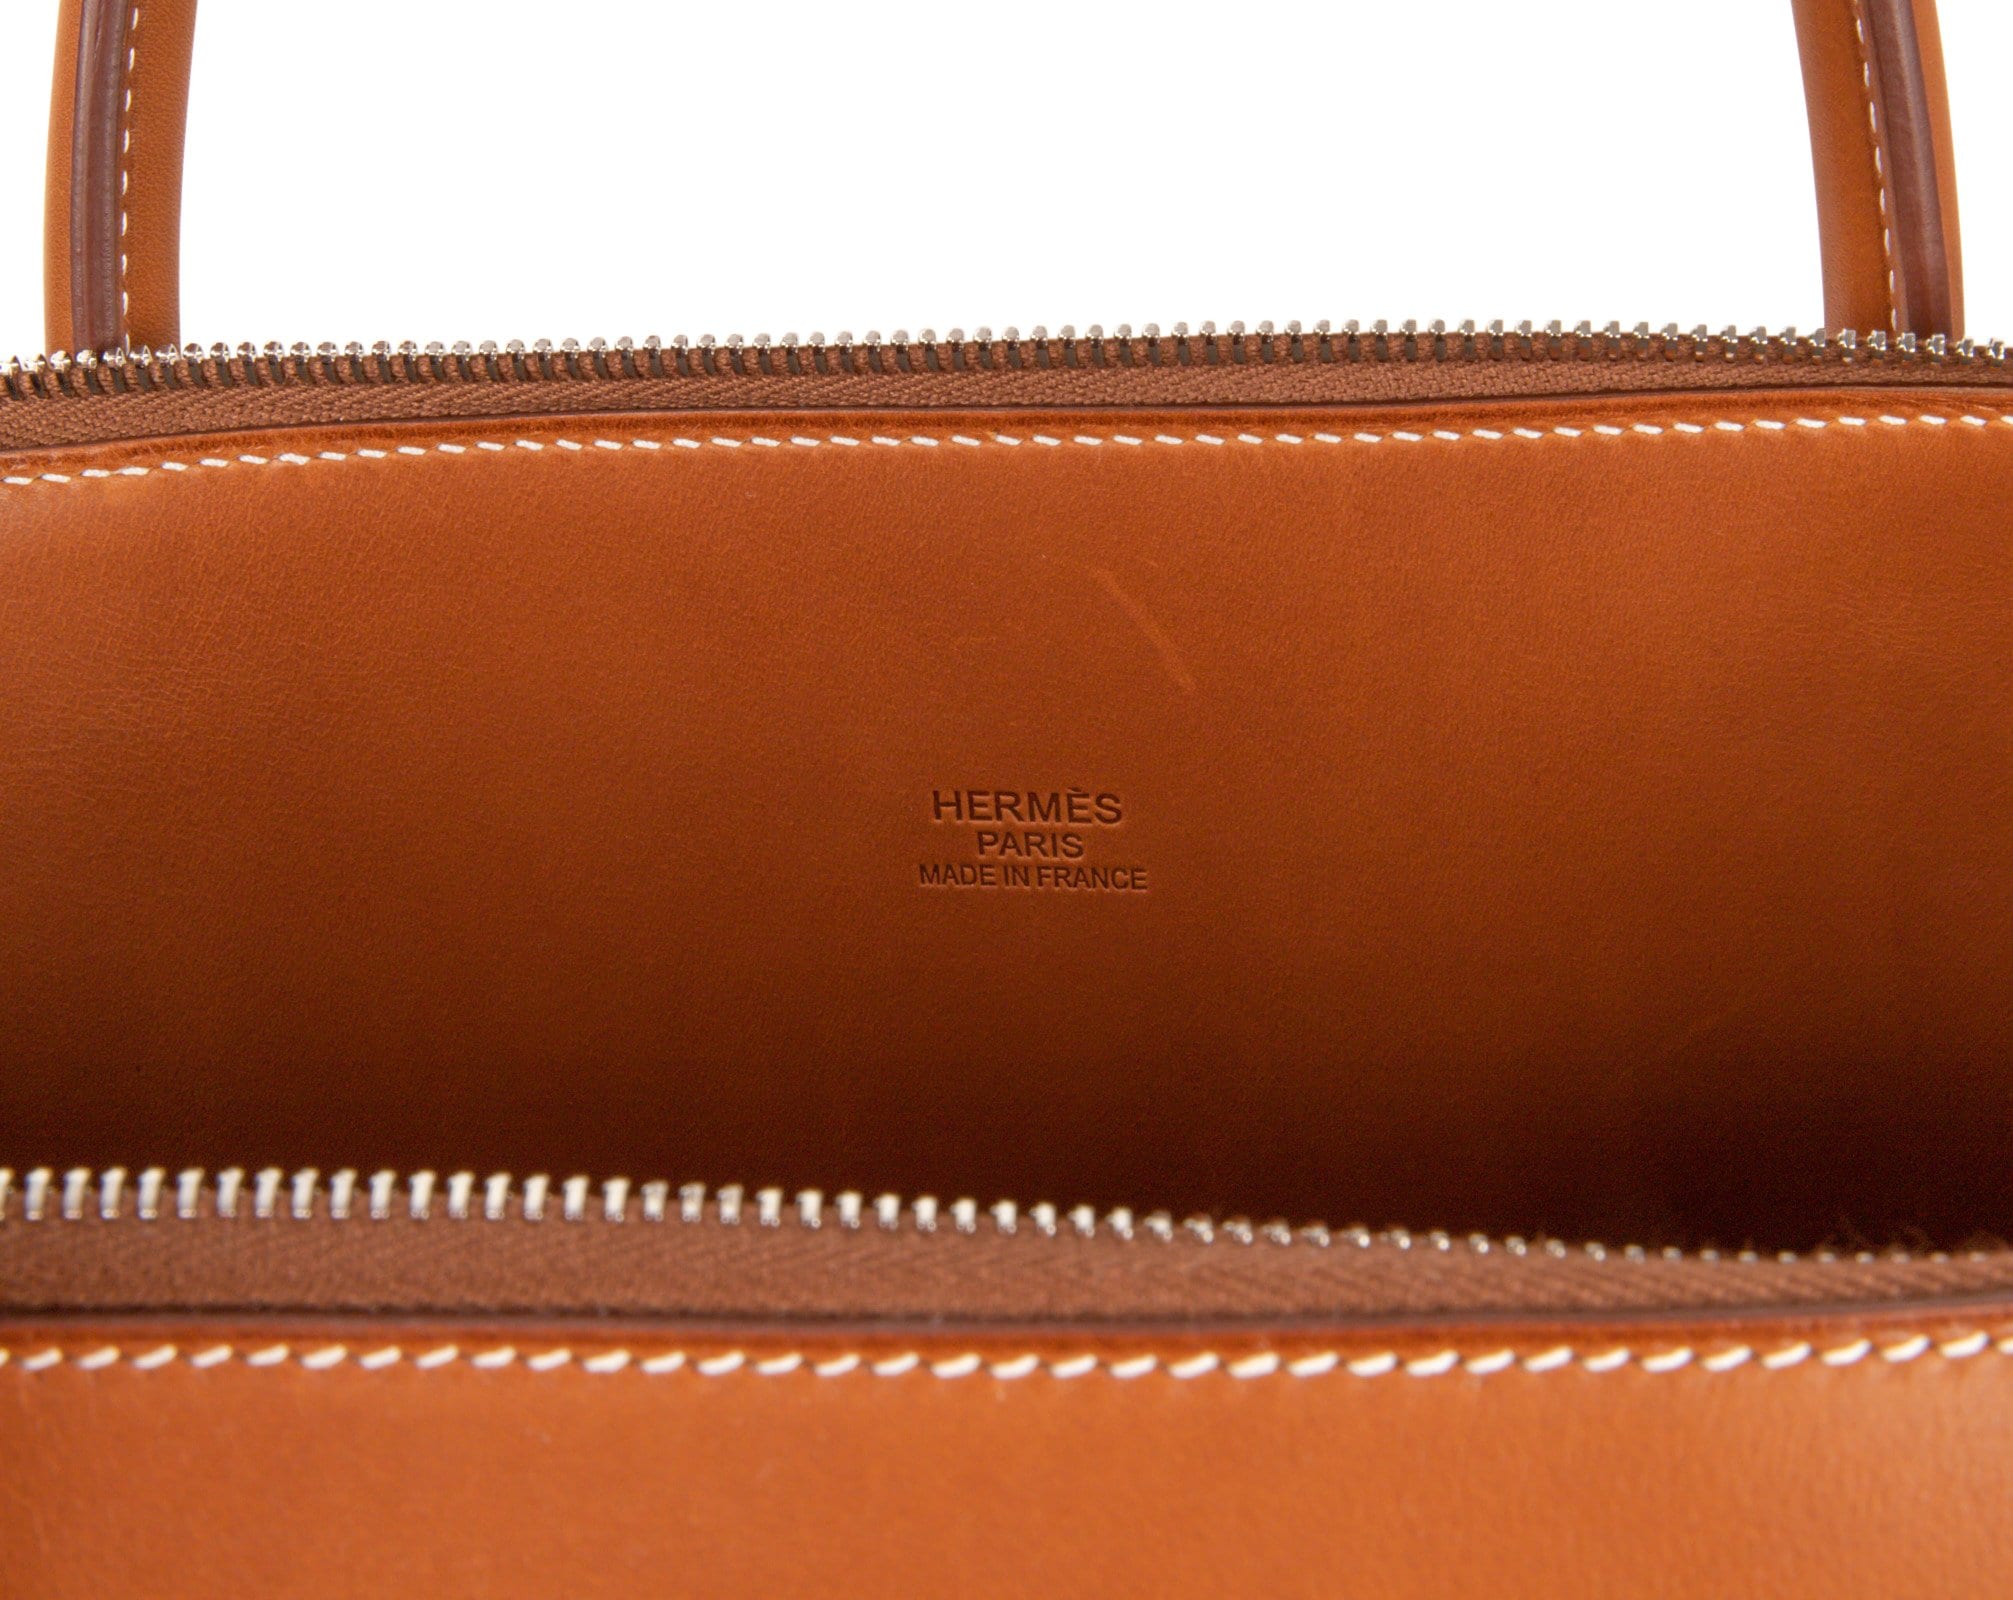 Complete History of the Hermès Bolide